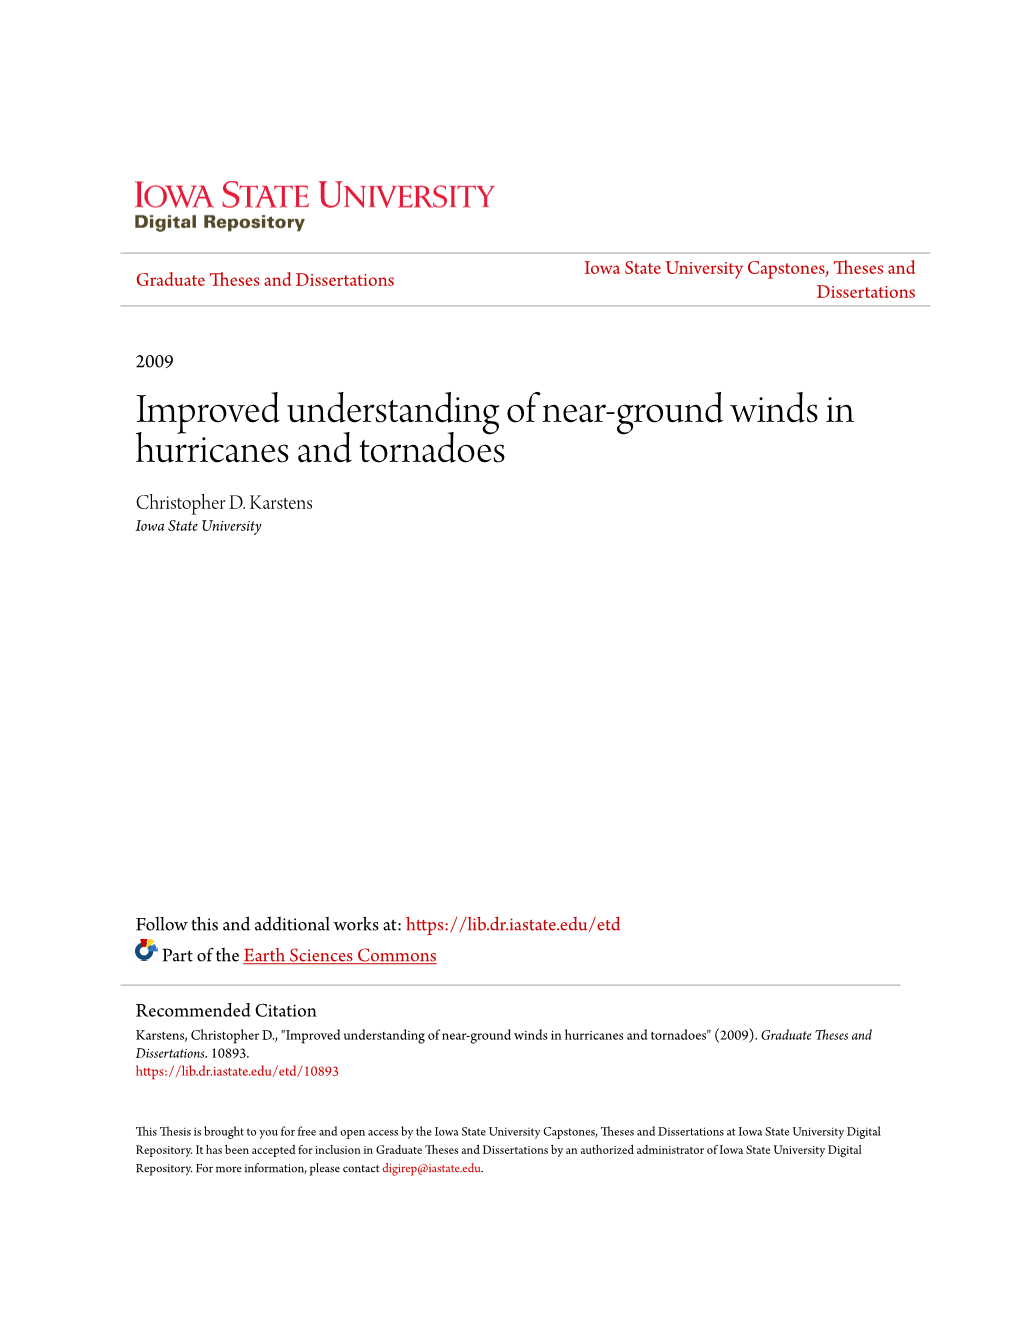 Improved Understanding of Near-Ground Winds in Hurricanes and Tornadoes Christopher D